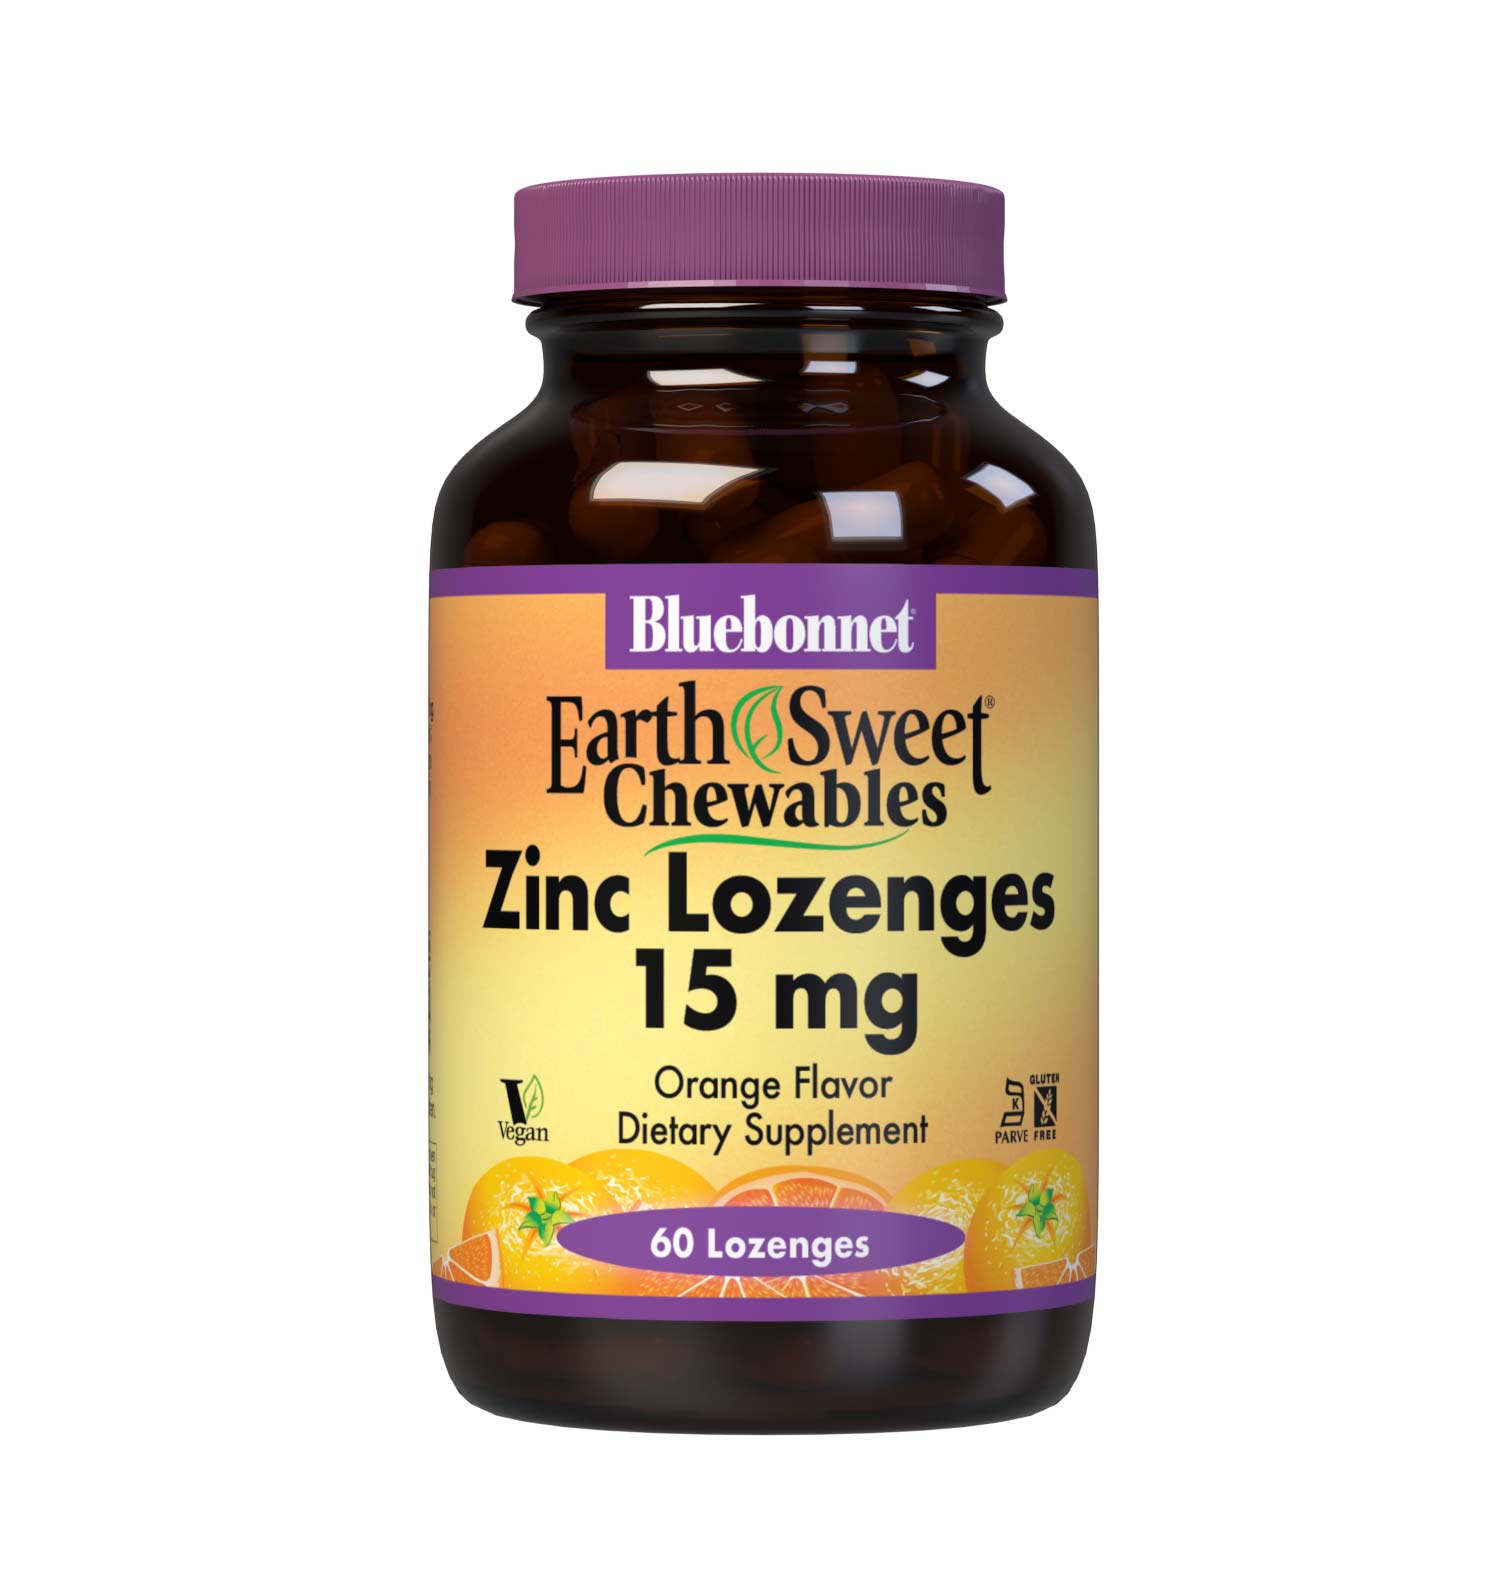 Bluebonnet’s EarthSweet Chewables 60 count Zinc Lozenges 15 mg are formulated with zinc gluconate/citrate, plus vitamin C from L-ascorbic acid and sodium ascorbate to support immune health. Sweetened with EarthSweet, a proprietary sweetening mix of fruit powders and sugar cane crystal. #size_60 count